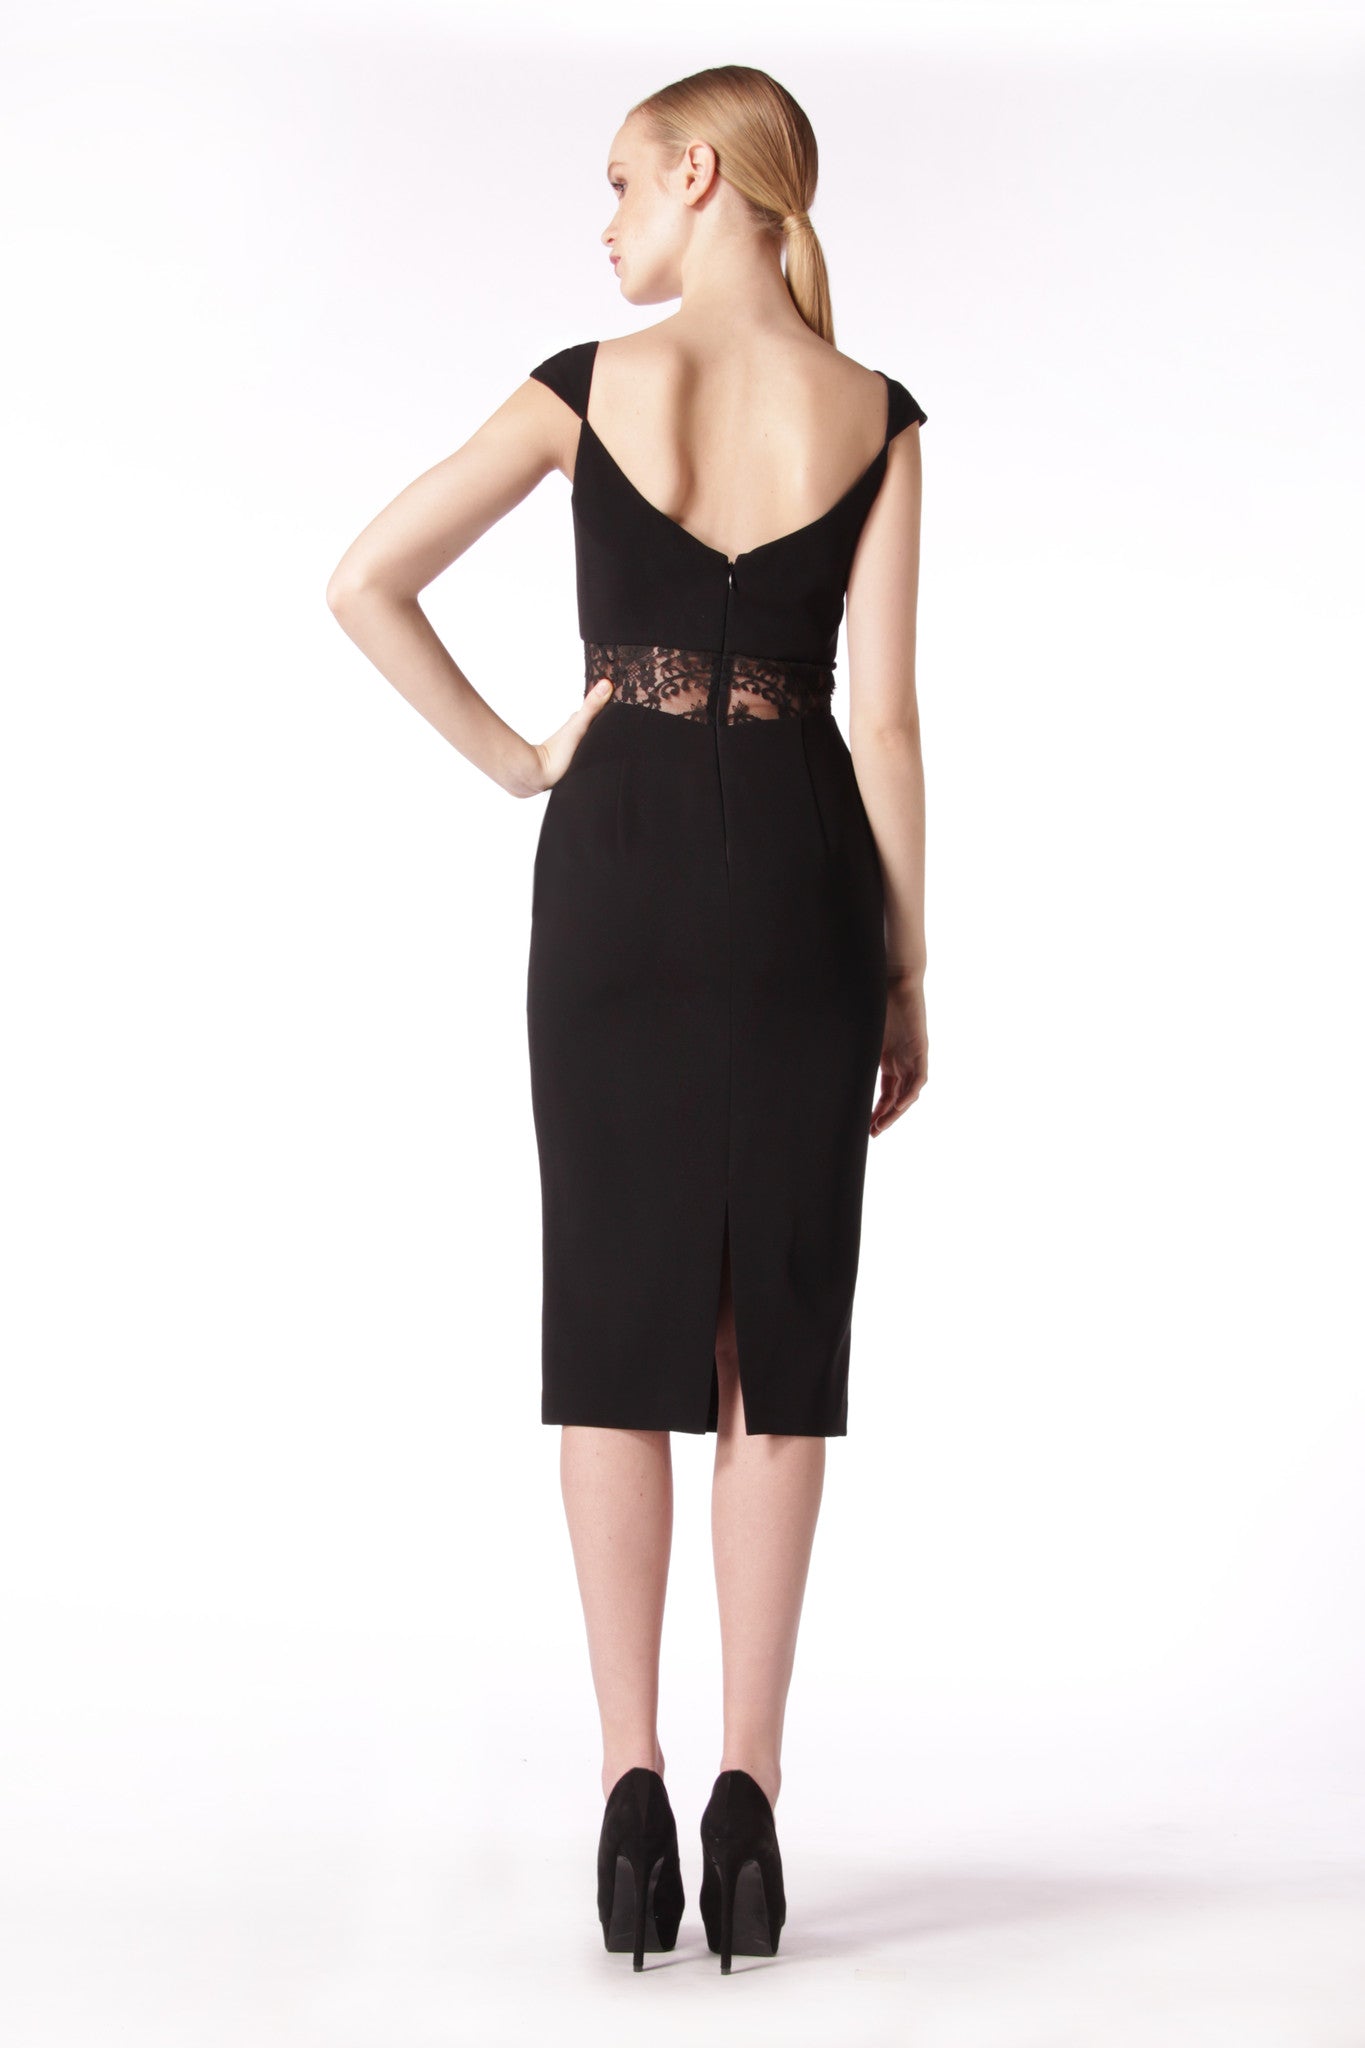 CAP SLEEVE PENCIL DRESS WITH LACE CUT-OUT DETAIL